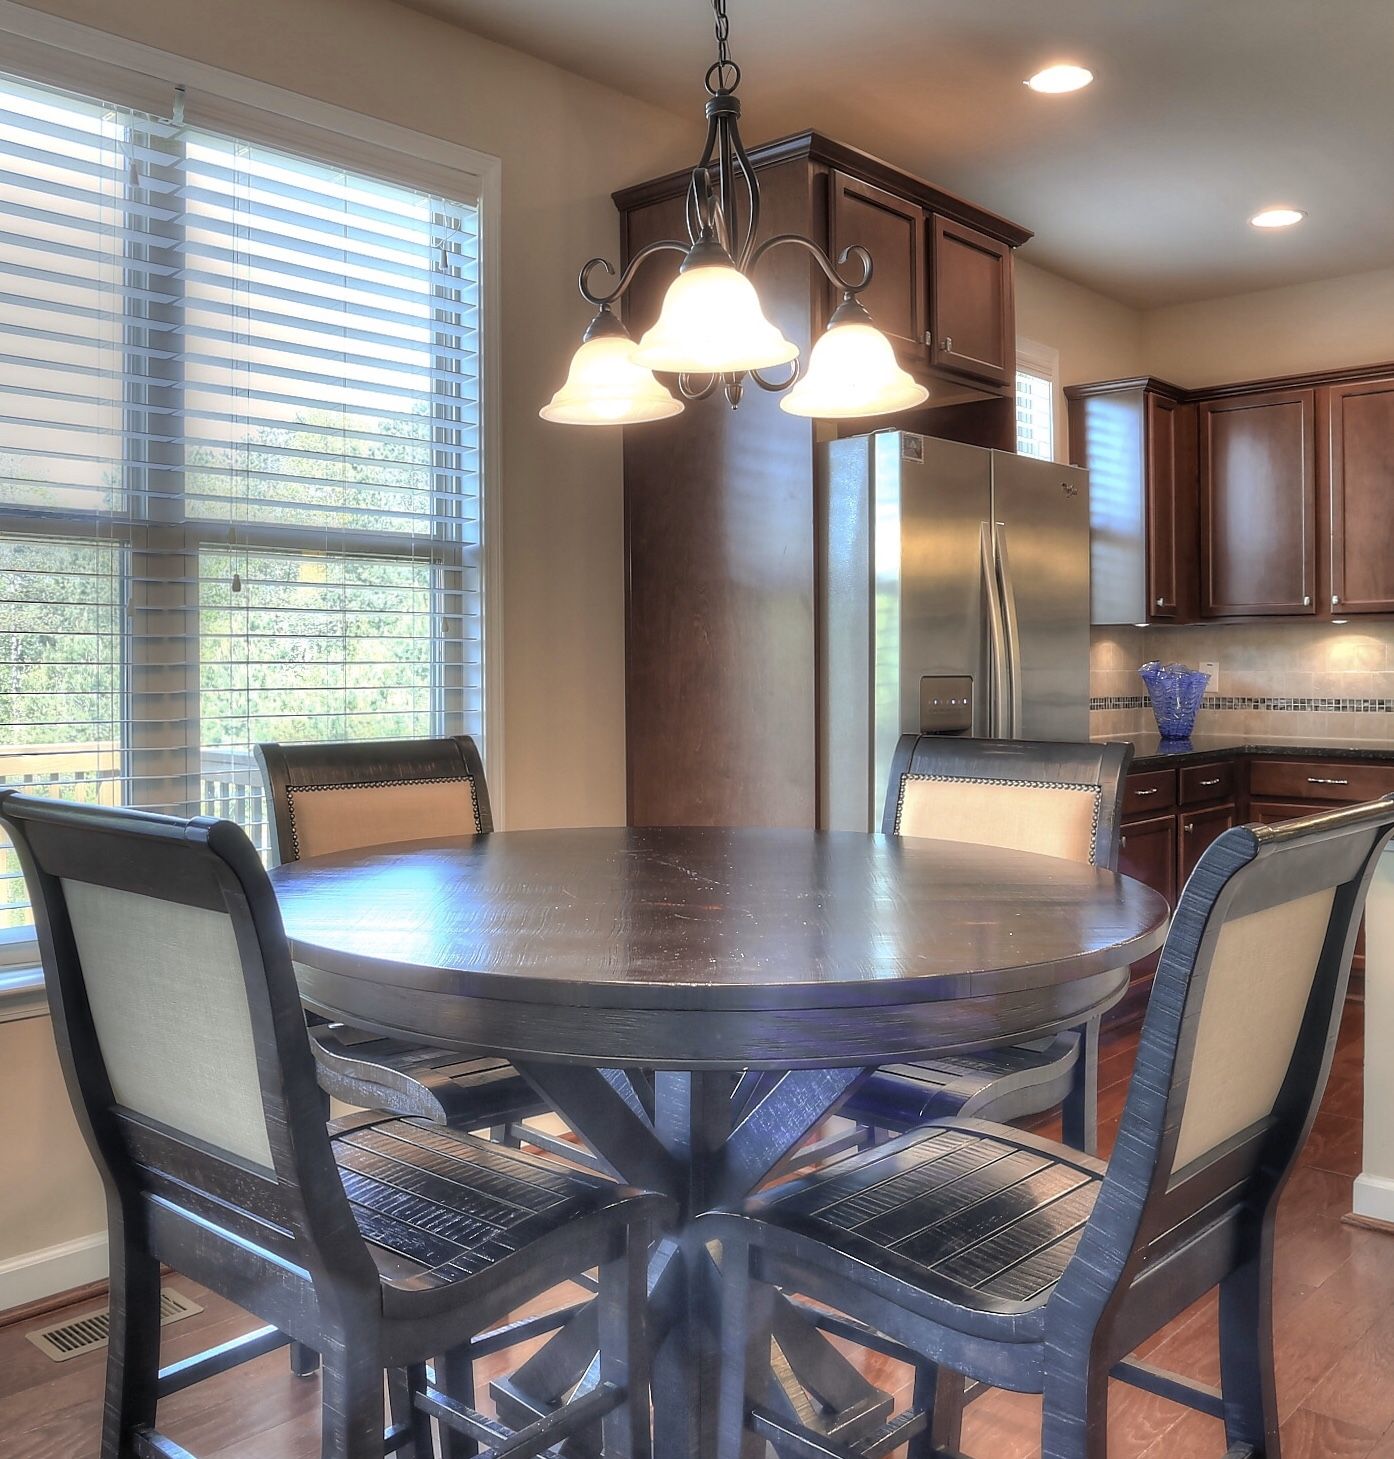 Breakfast table with 4 chairs— Counter Height